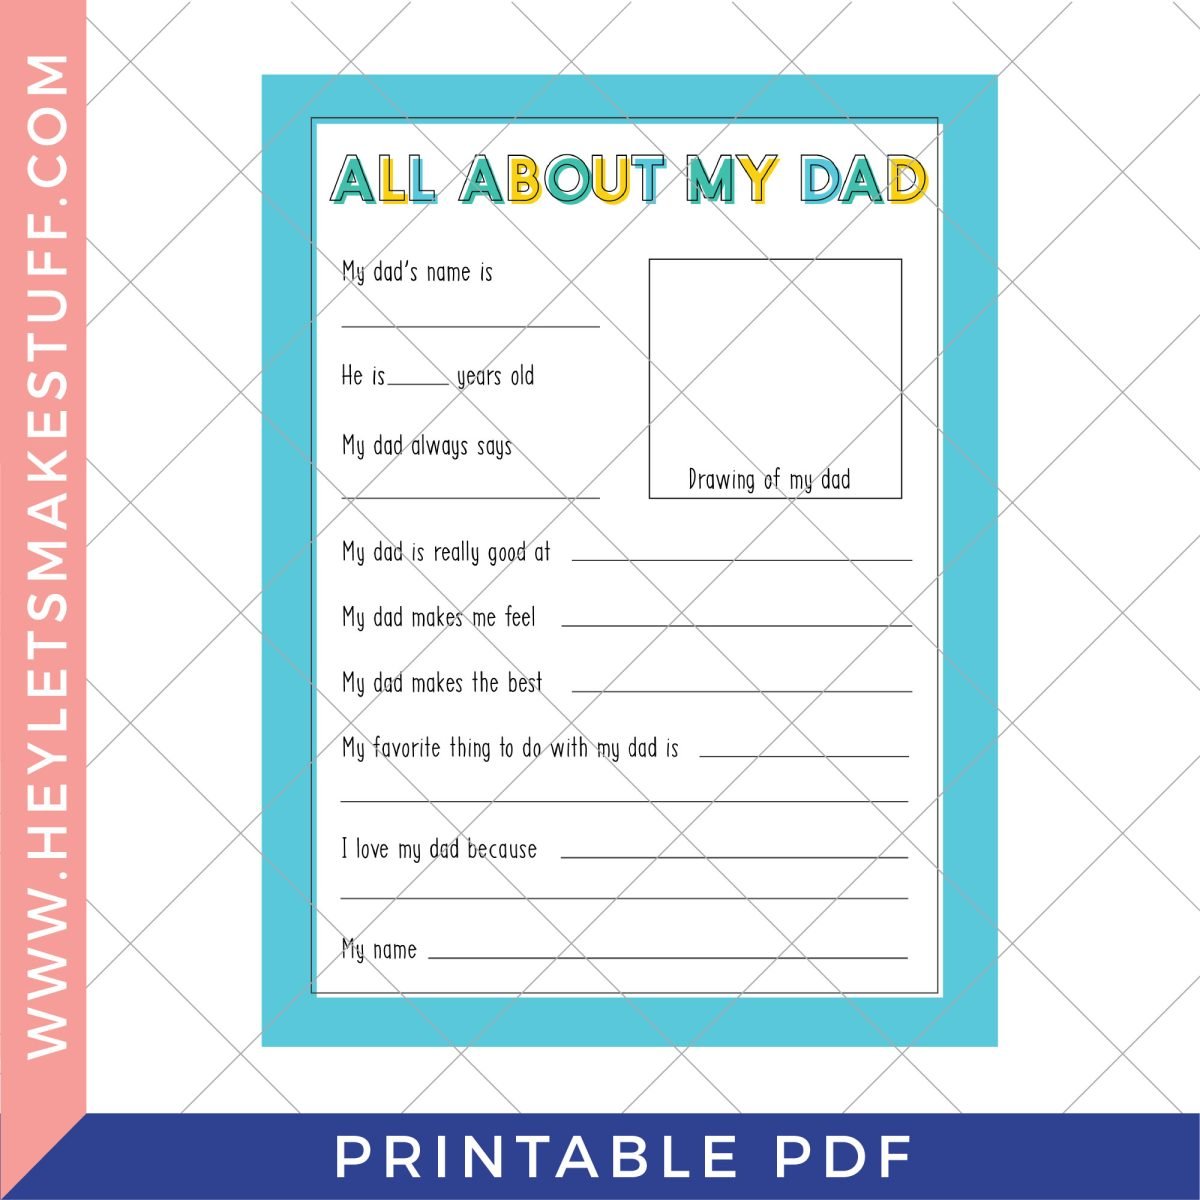 All About My Dad printable security template